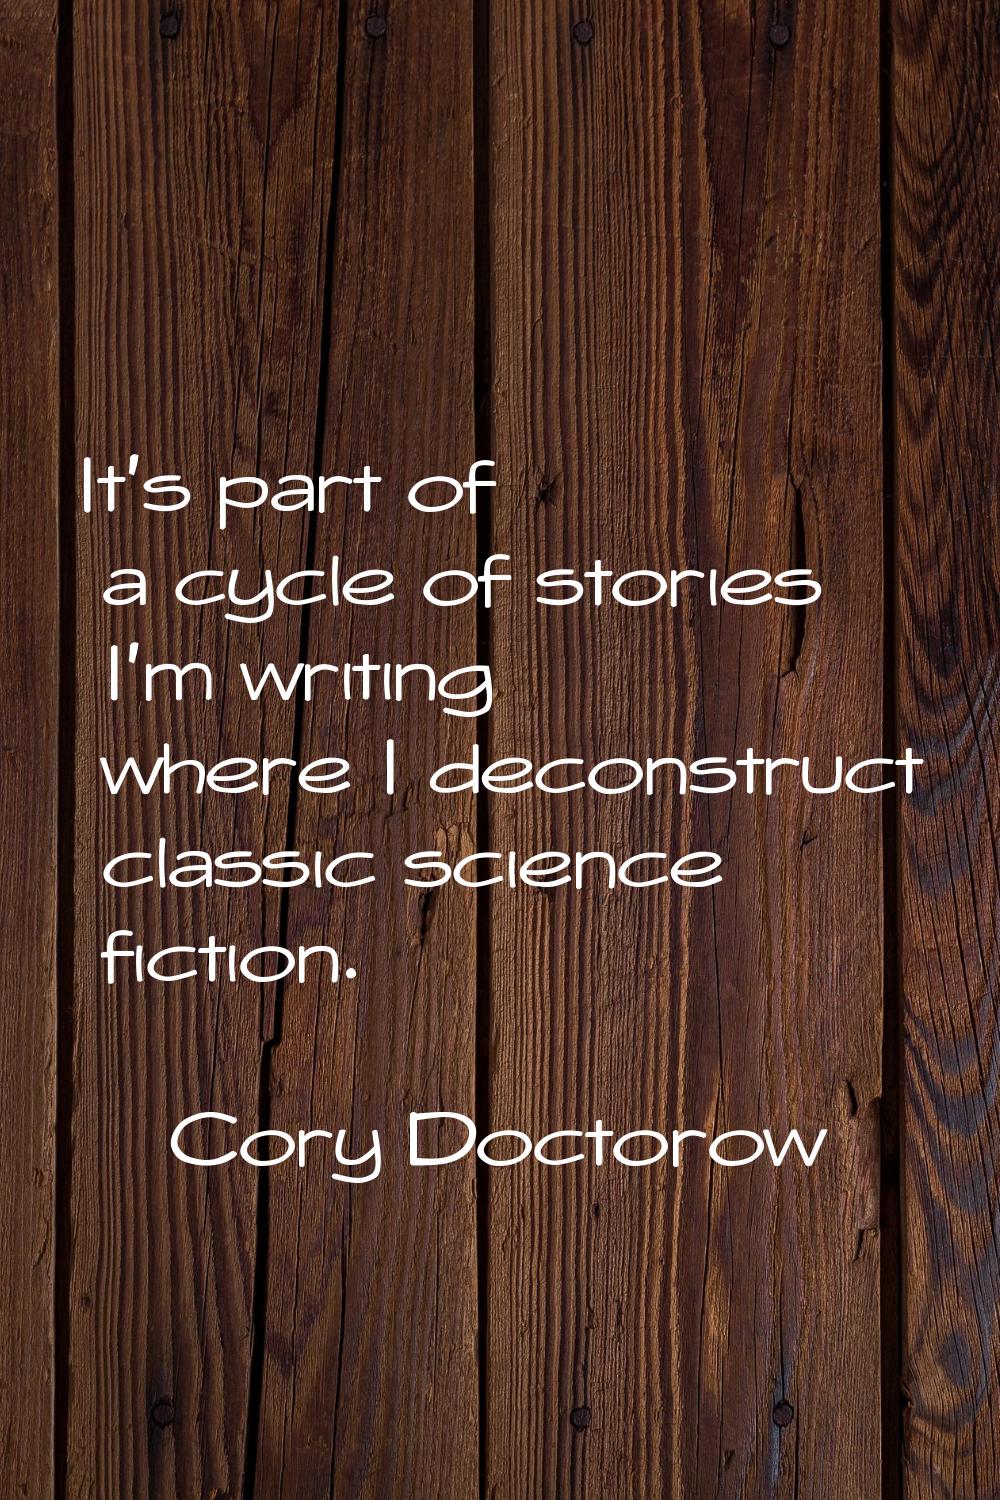 It's part of a cycle of stories I'm writing where I deconstruct classic science fiction.